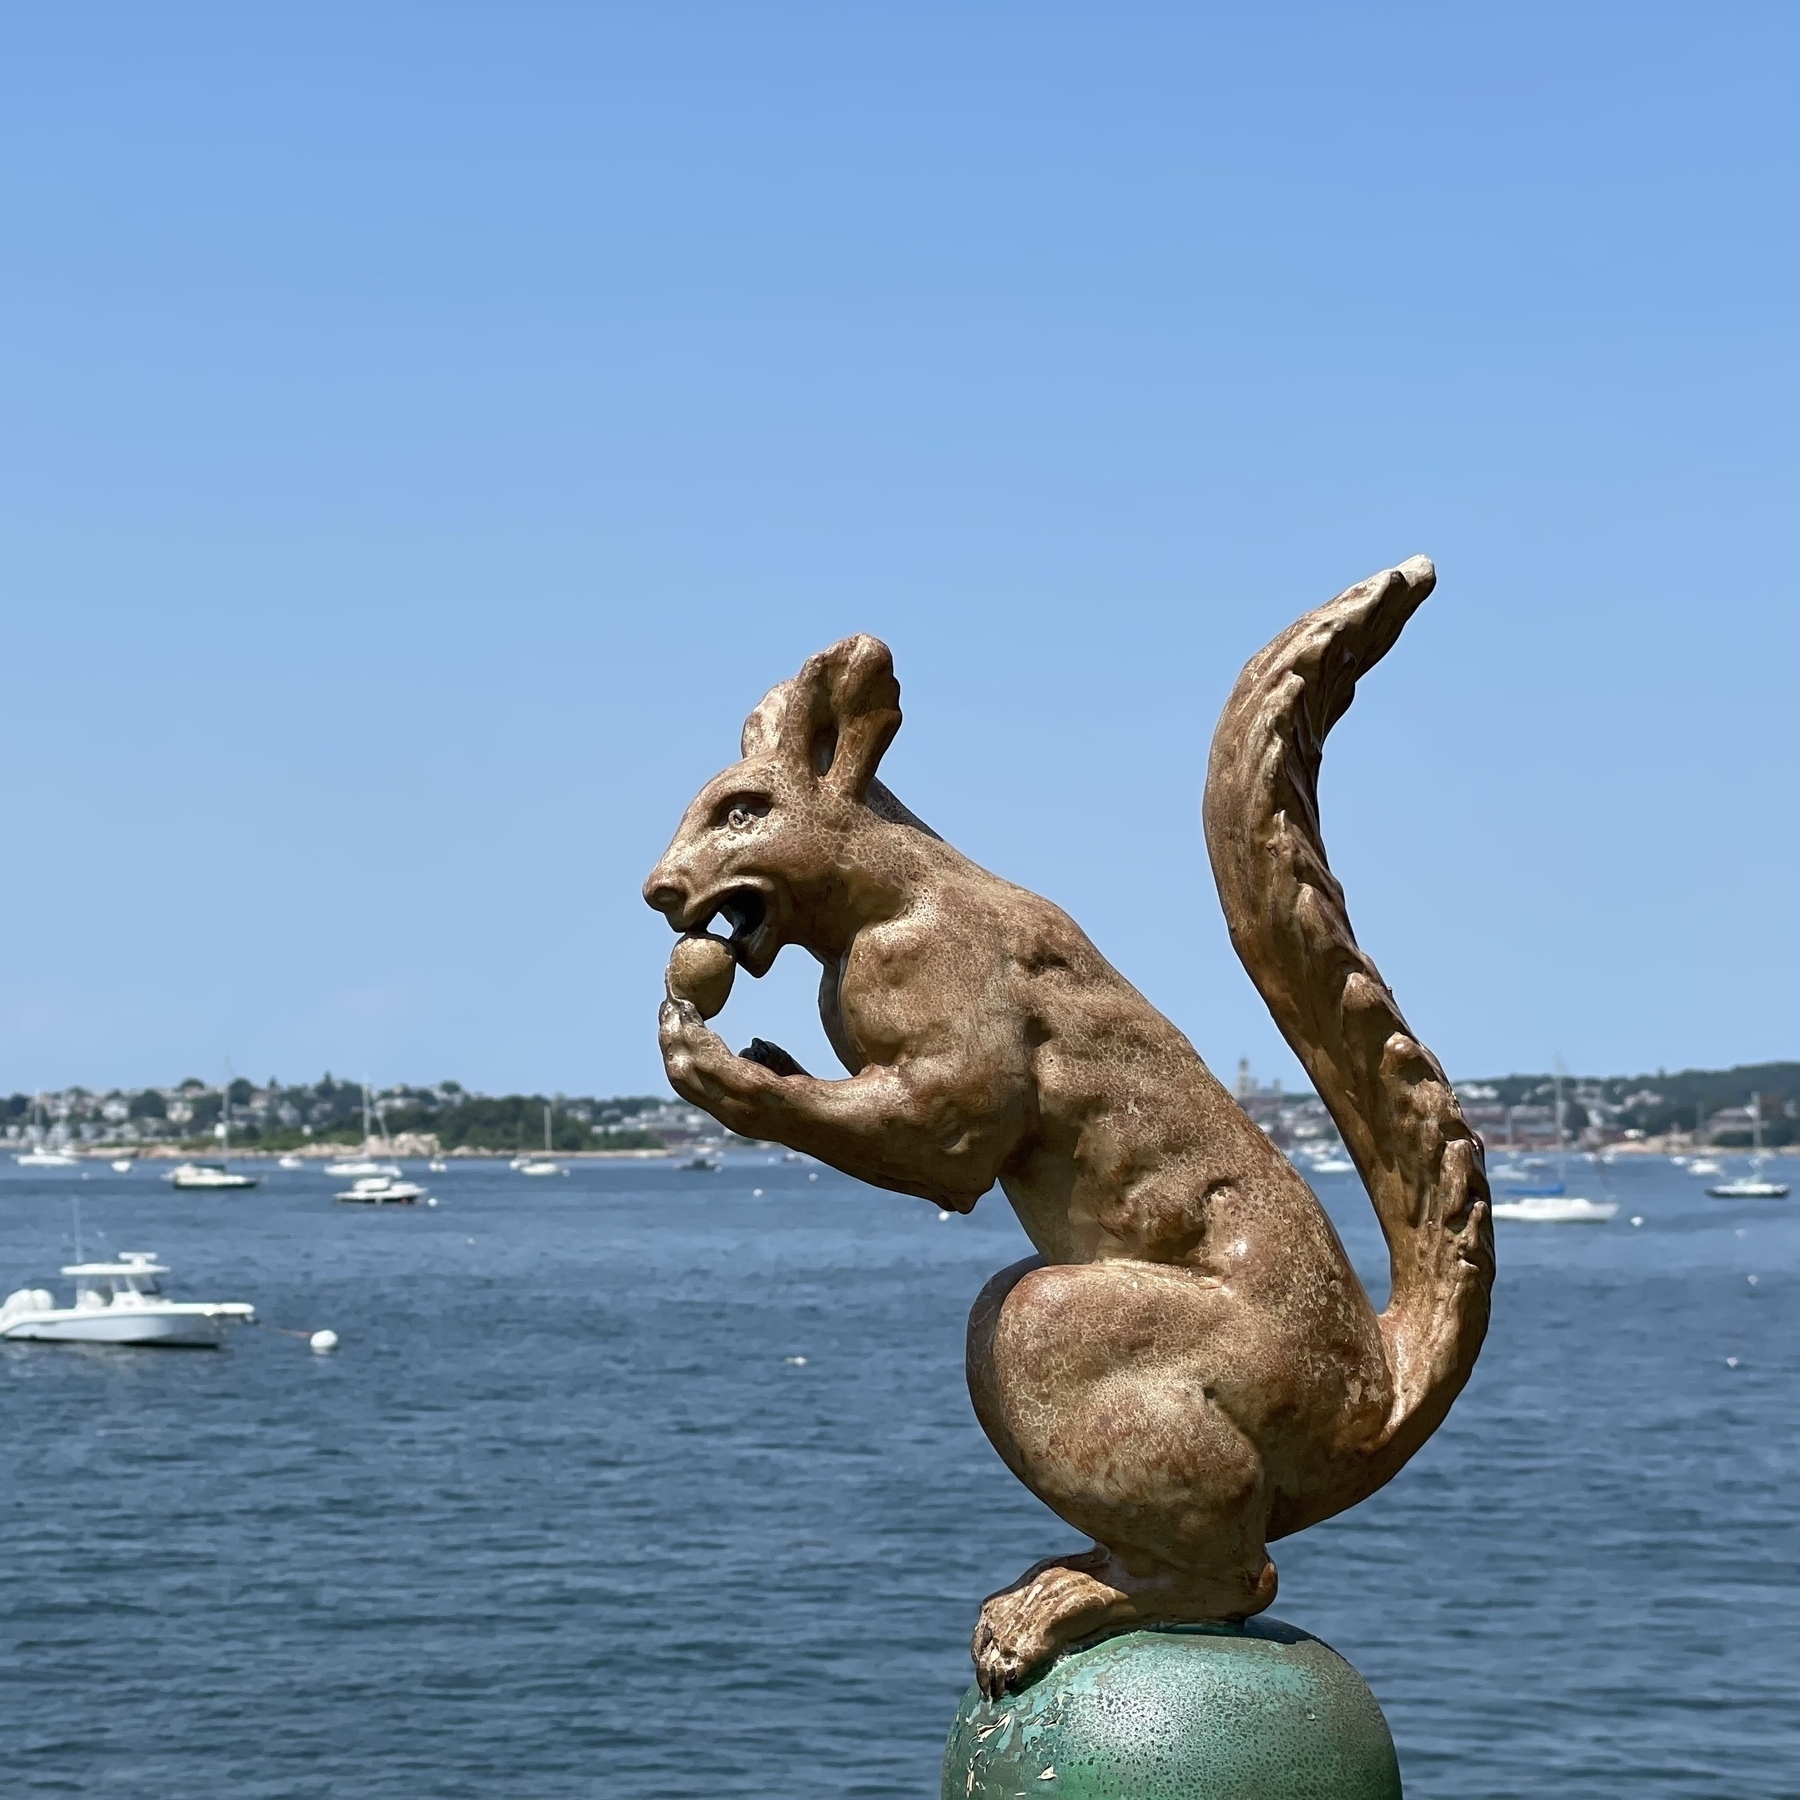 Squirrel with nut decorative finial in foreground and boats in harbor beyond